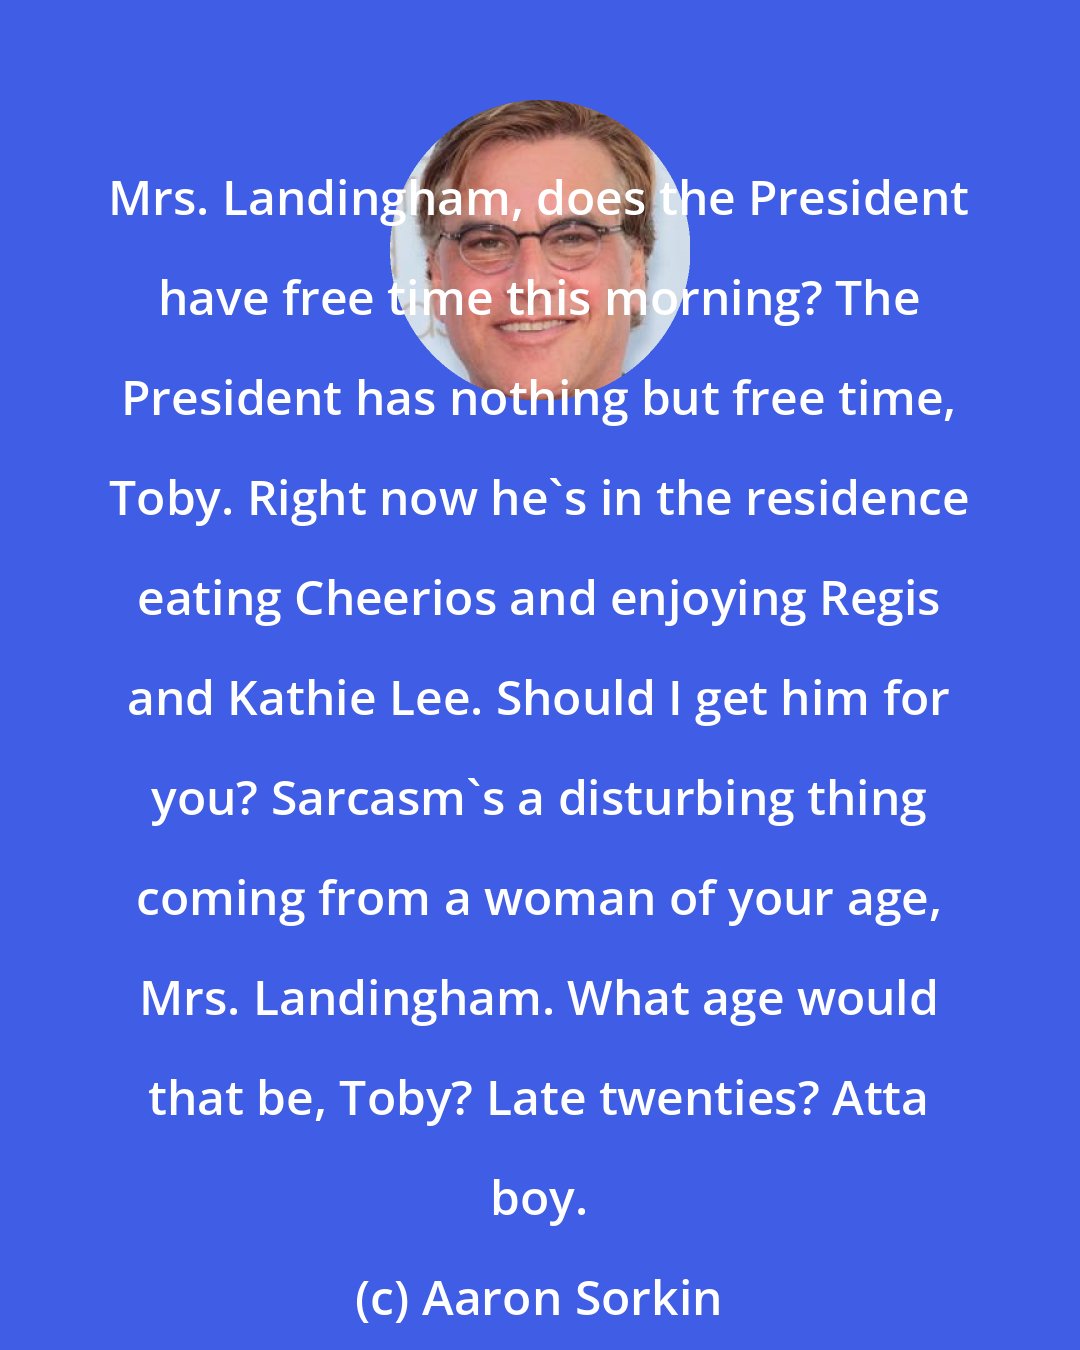 Aaron Sorkin: Mrs. Landingham, does the President have free time this morning? The President has nothing but free time, Toby. Right now he's in the residence eating Cheerios and enjoying Regis and Kathie Lee. Should I get him for you? Sarcasm's a disturbing thing coming from a woman of your age, Mrs. Landingham. What age would that be, Toby? Late twenties? Atta boy.